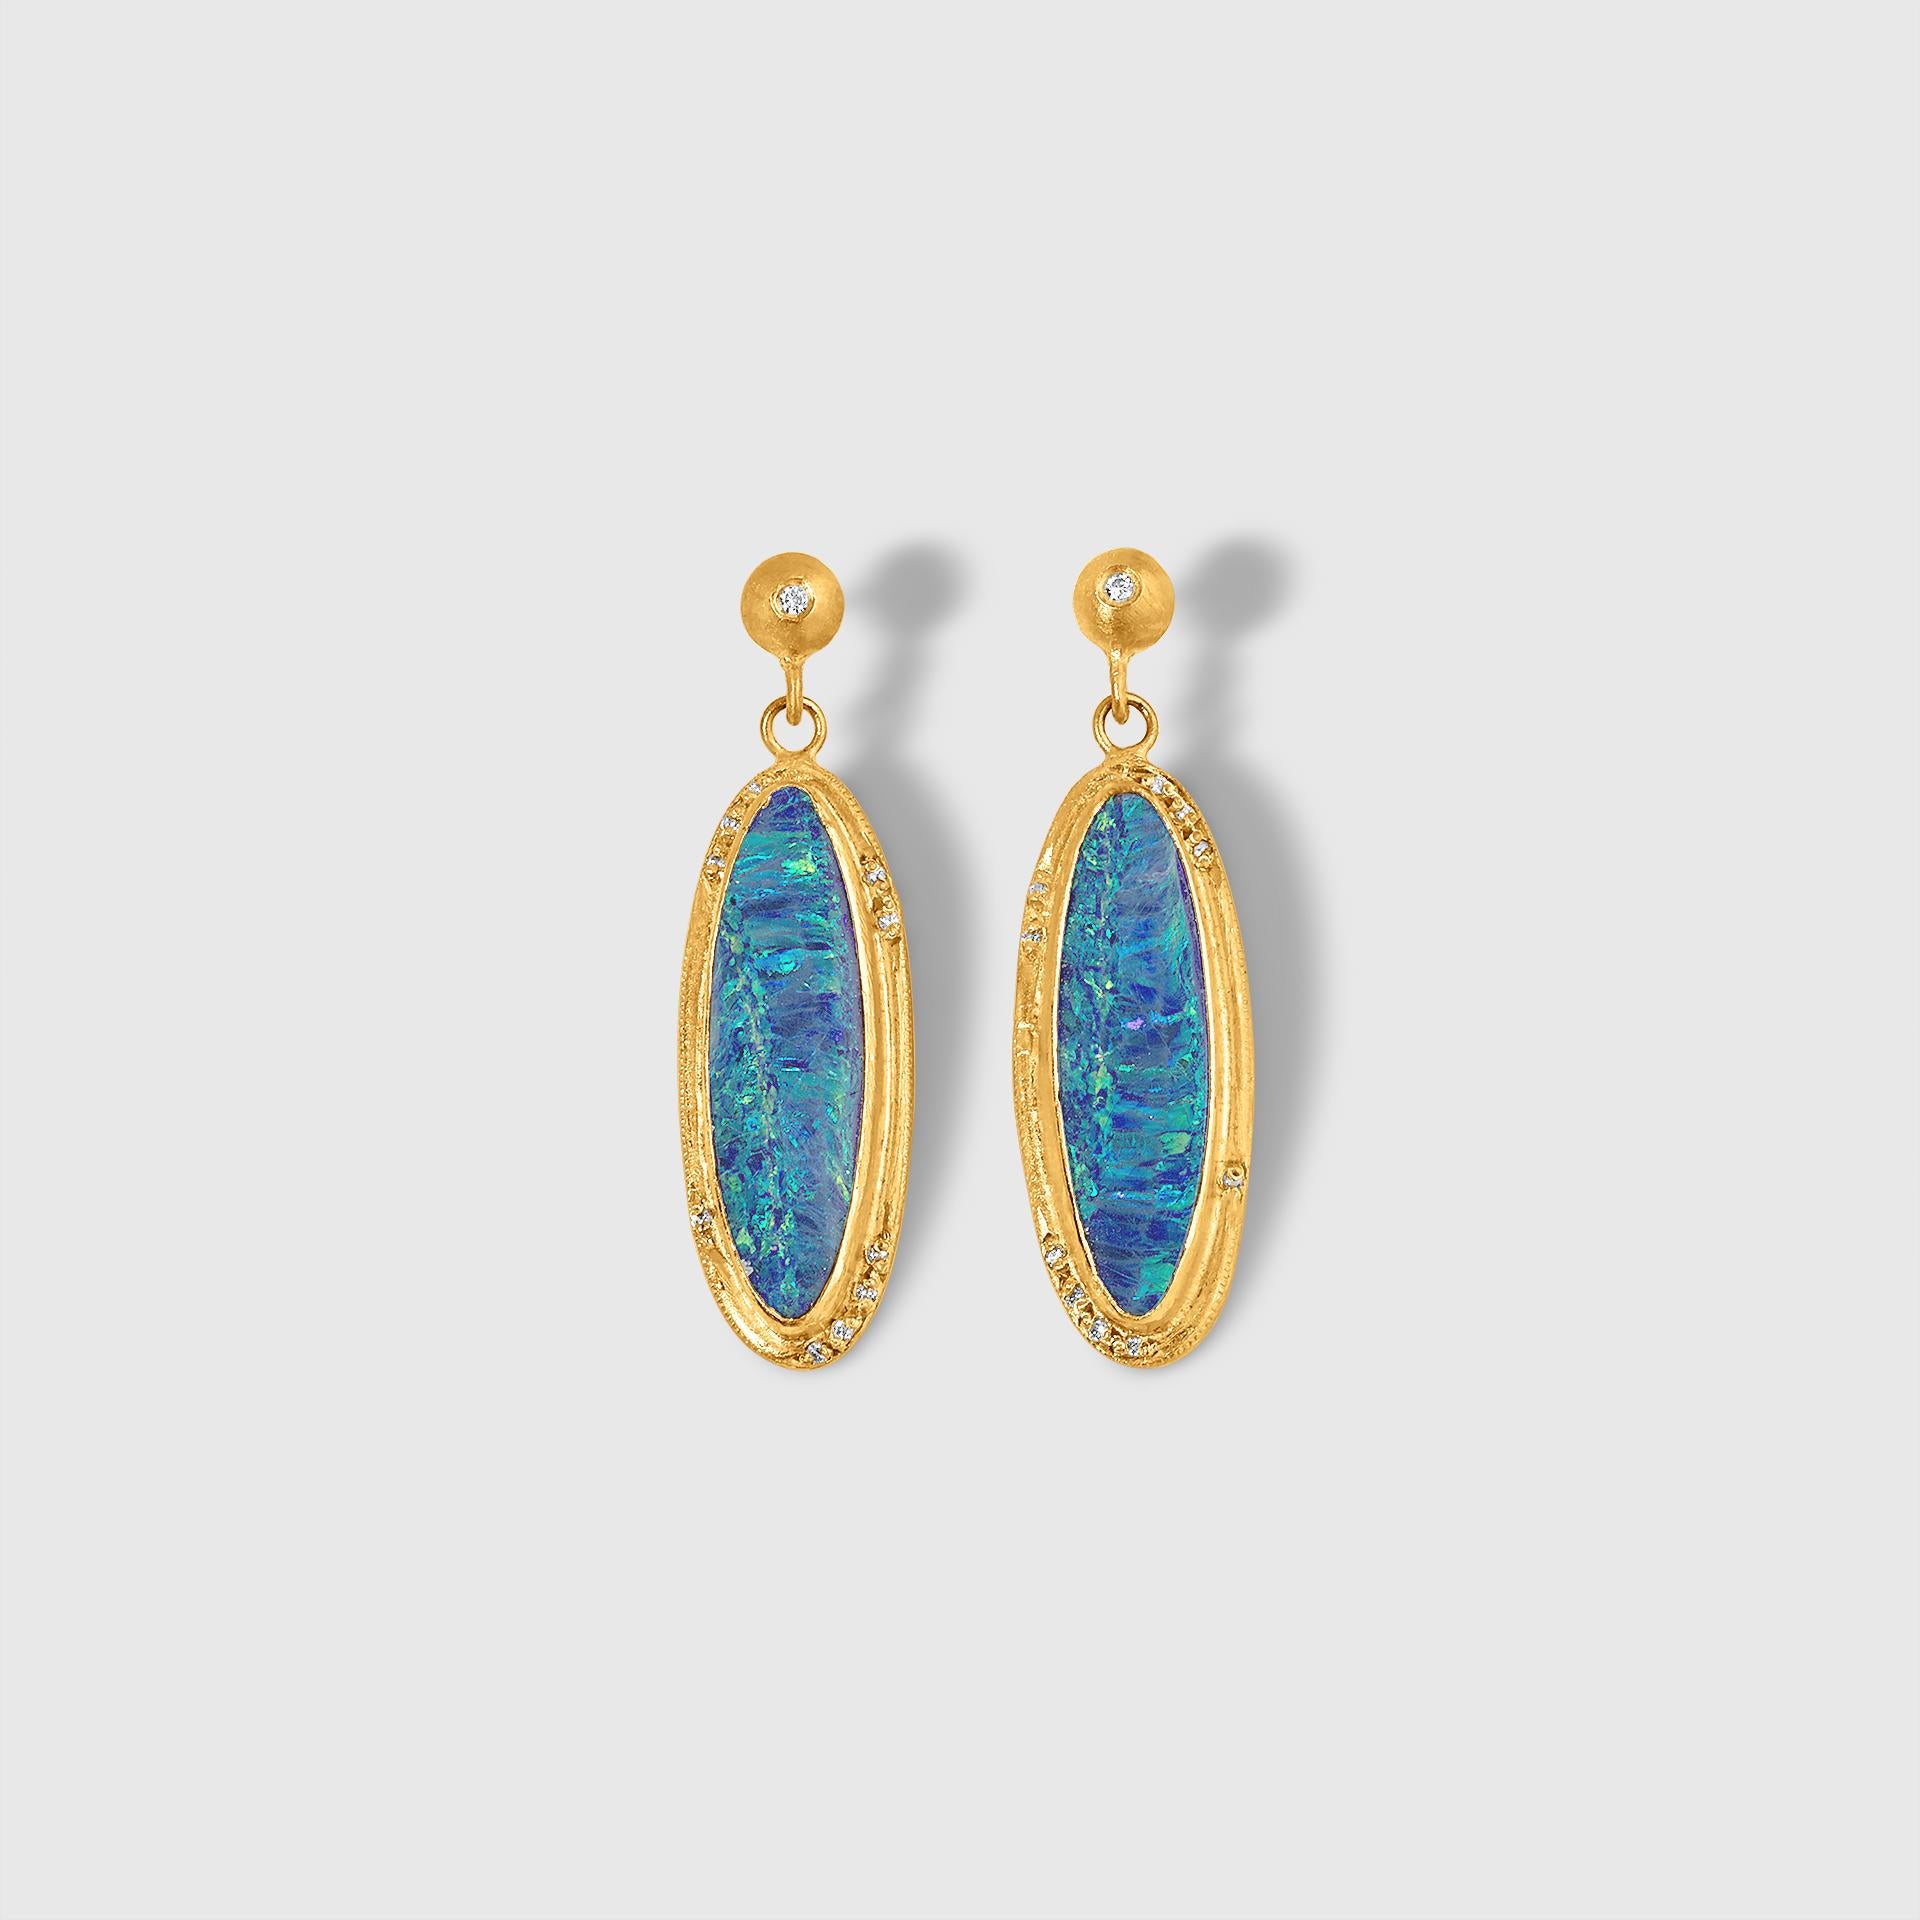 Byzantine Long Oval Doublet 9.26ct Opal Post Earrings with Diamonds 24kt Solid Yellow Gold